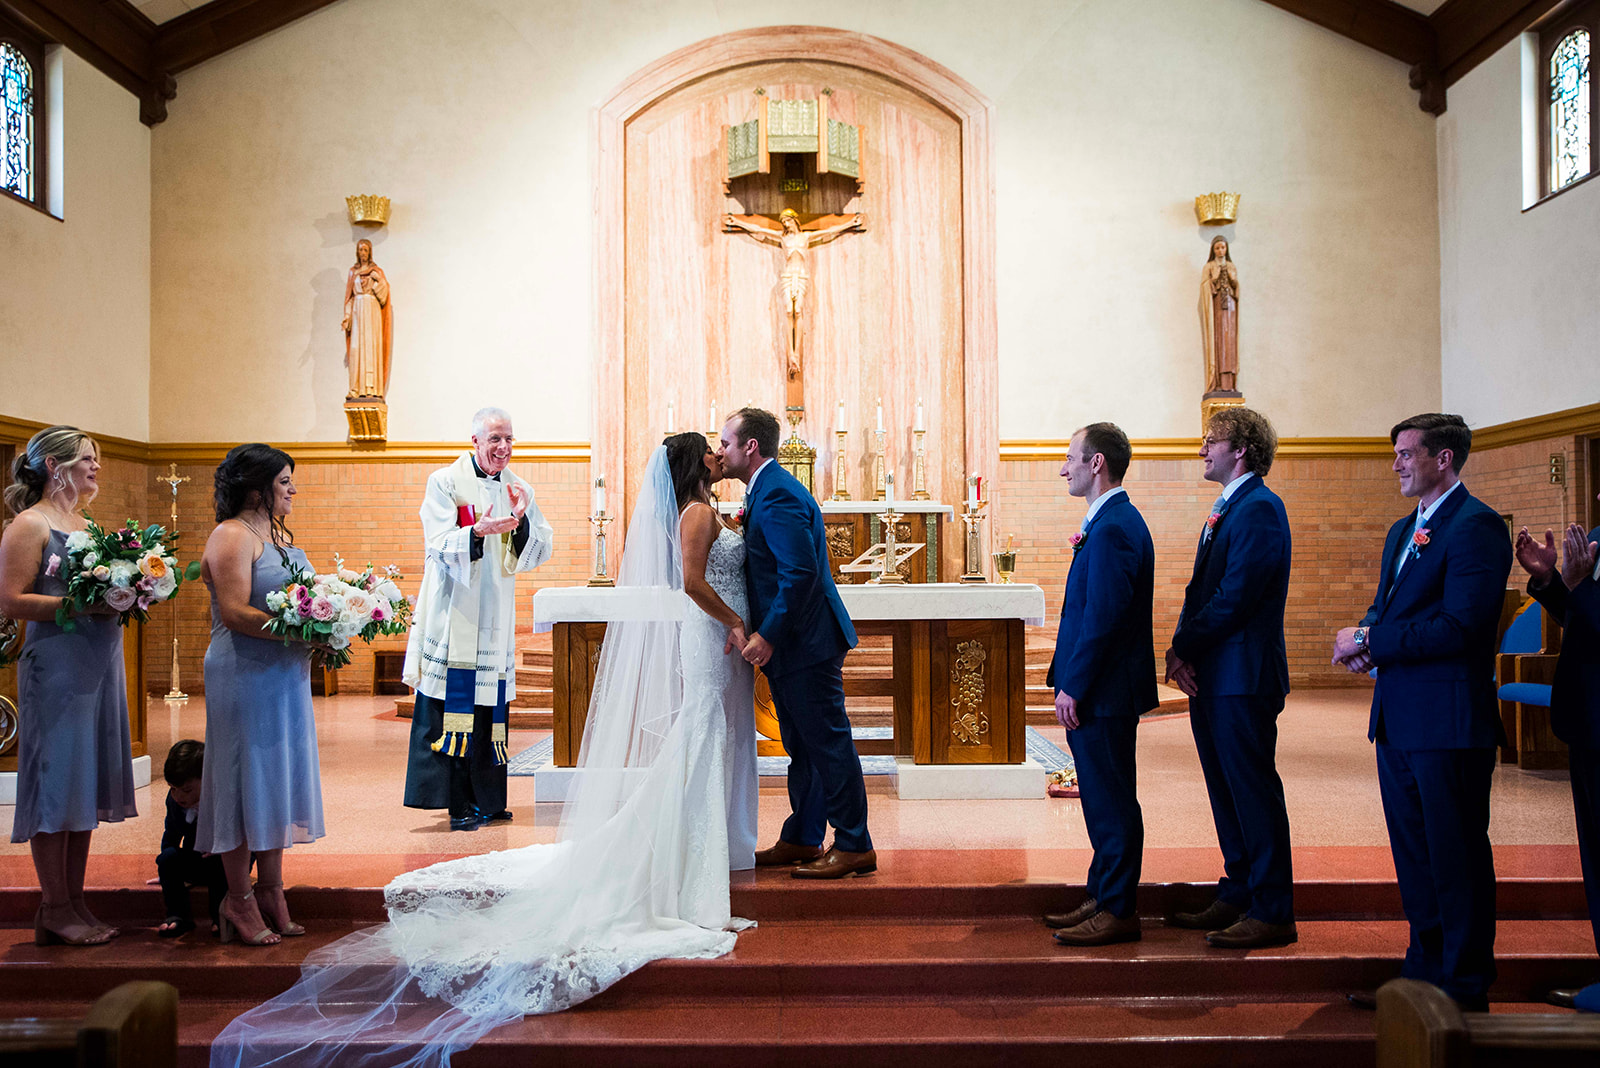 Bride and groom share their first kiss at the end of the wedding ceremony on the church altar.